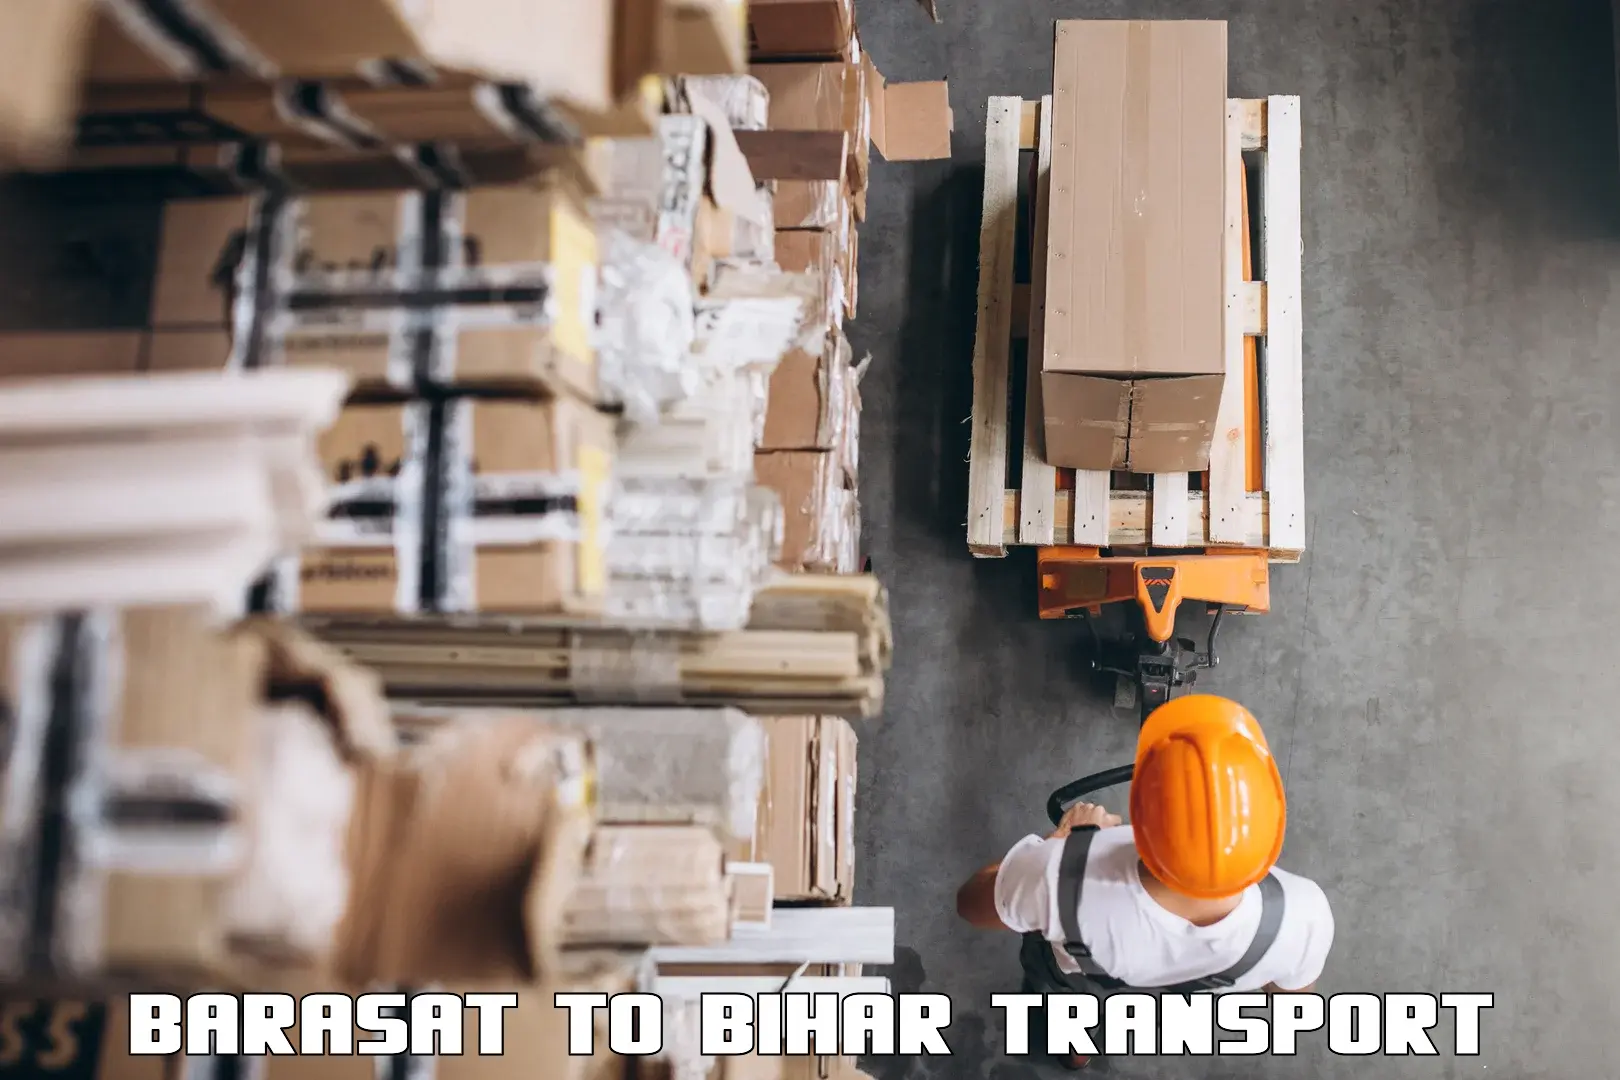 Vehicle transport services Barasat to Bankipore